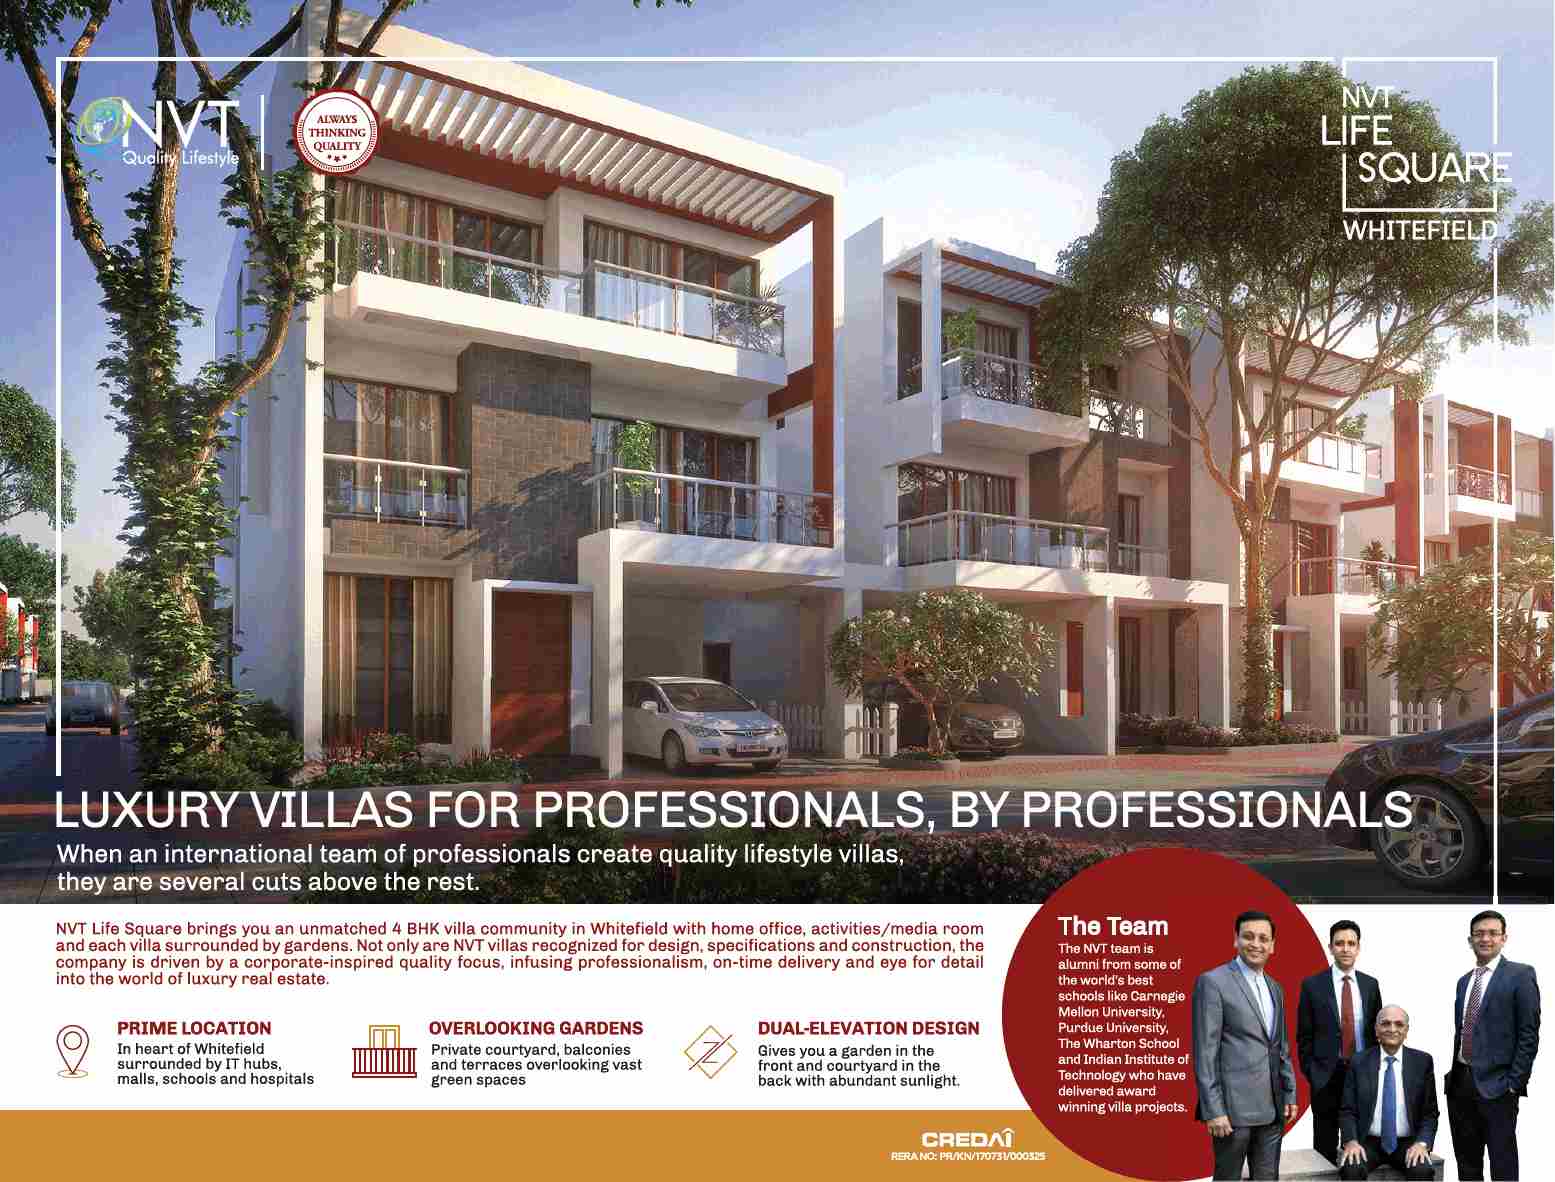 Reside in an unmatched 4 BHK villa community at NVT Life Square in Bangalore